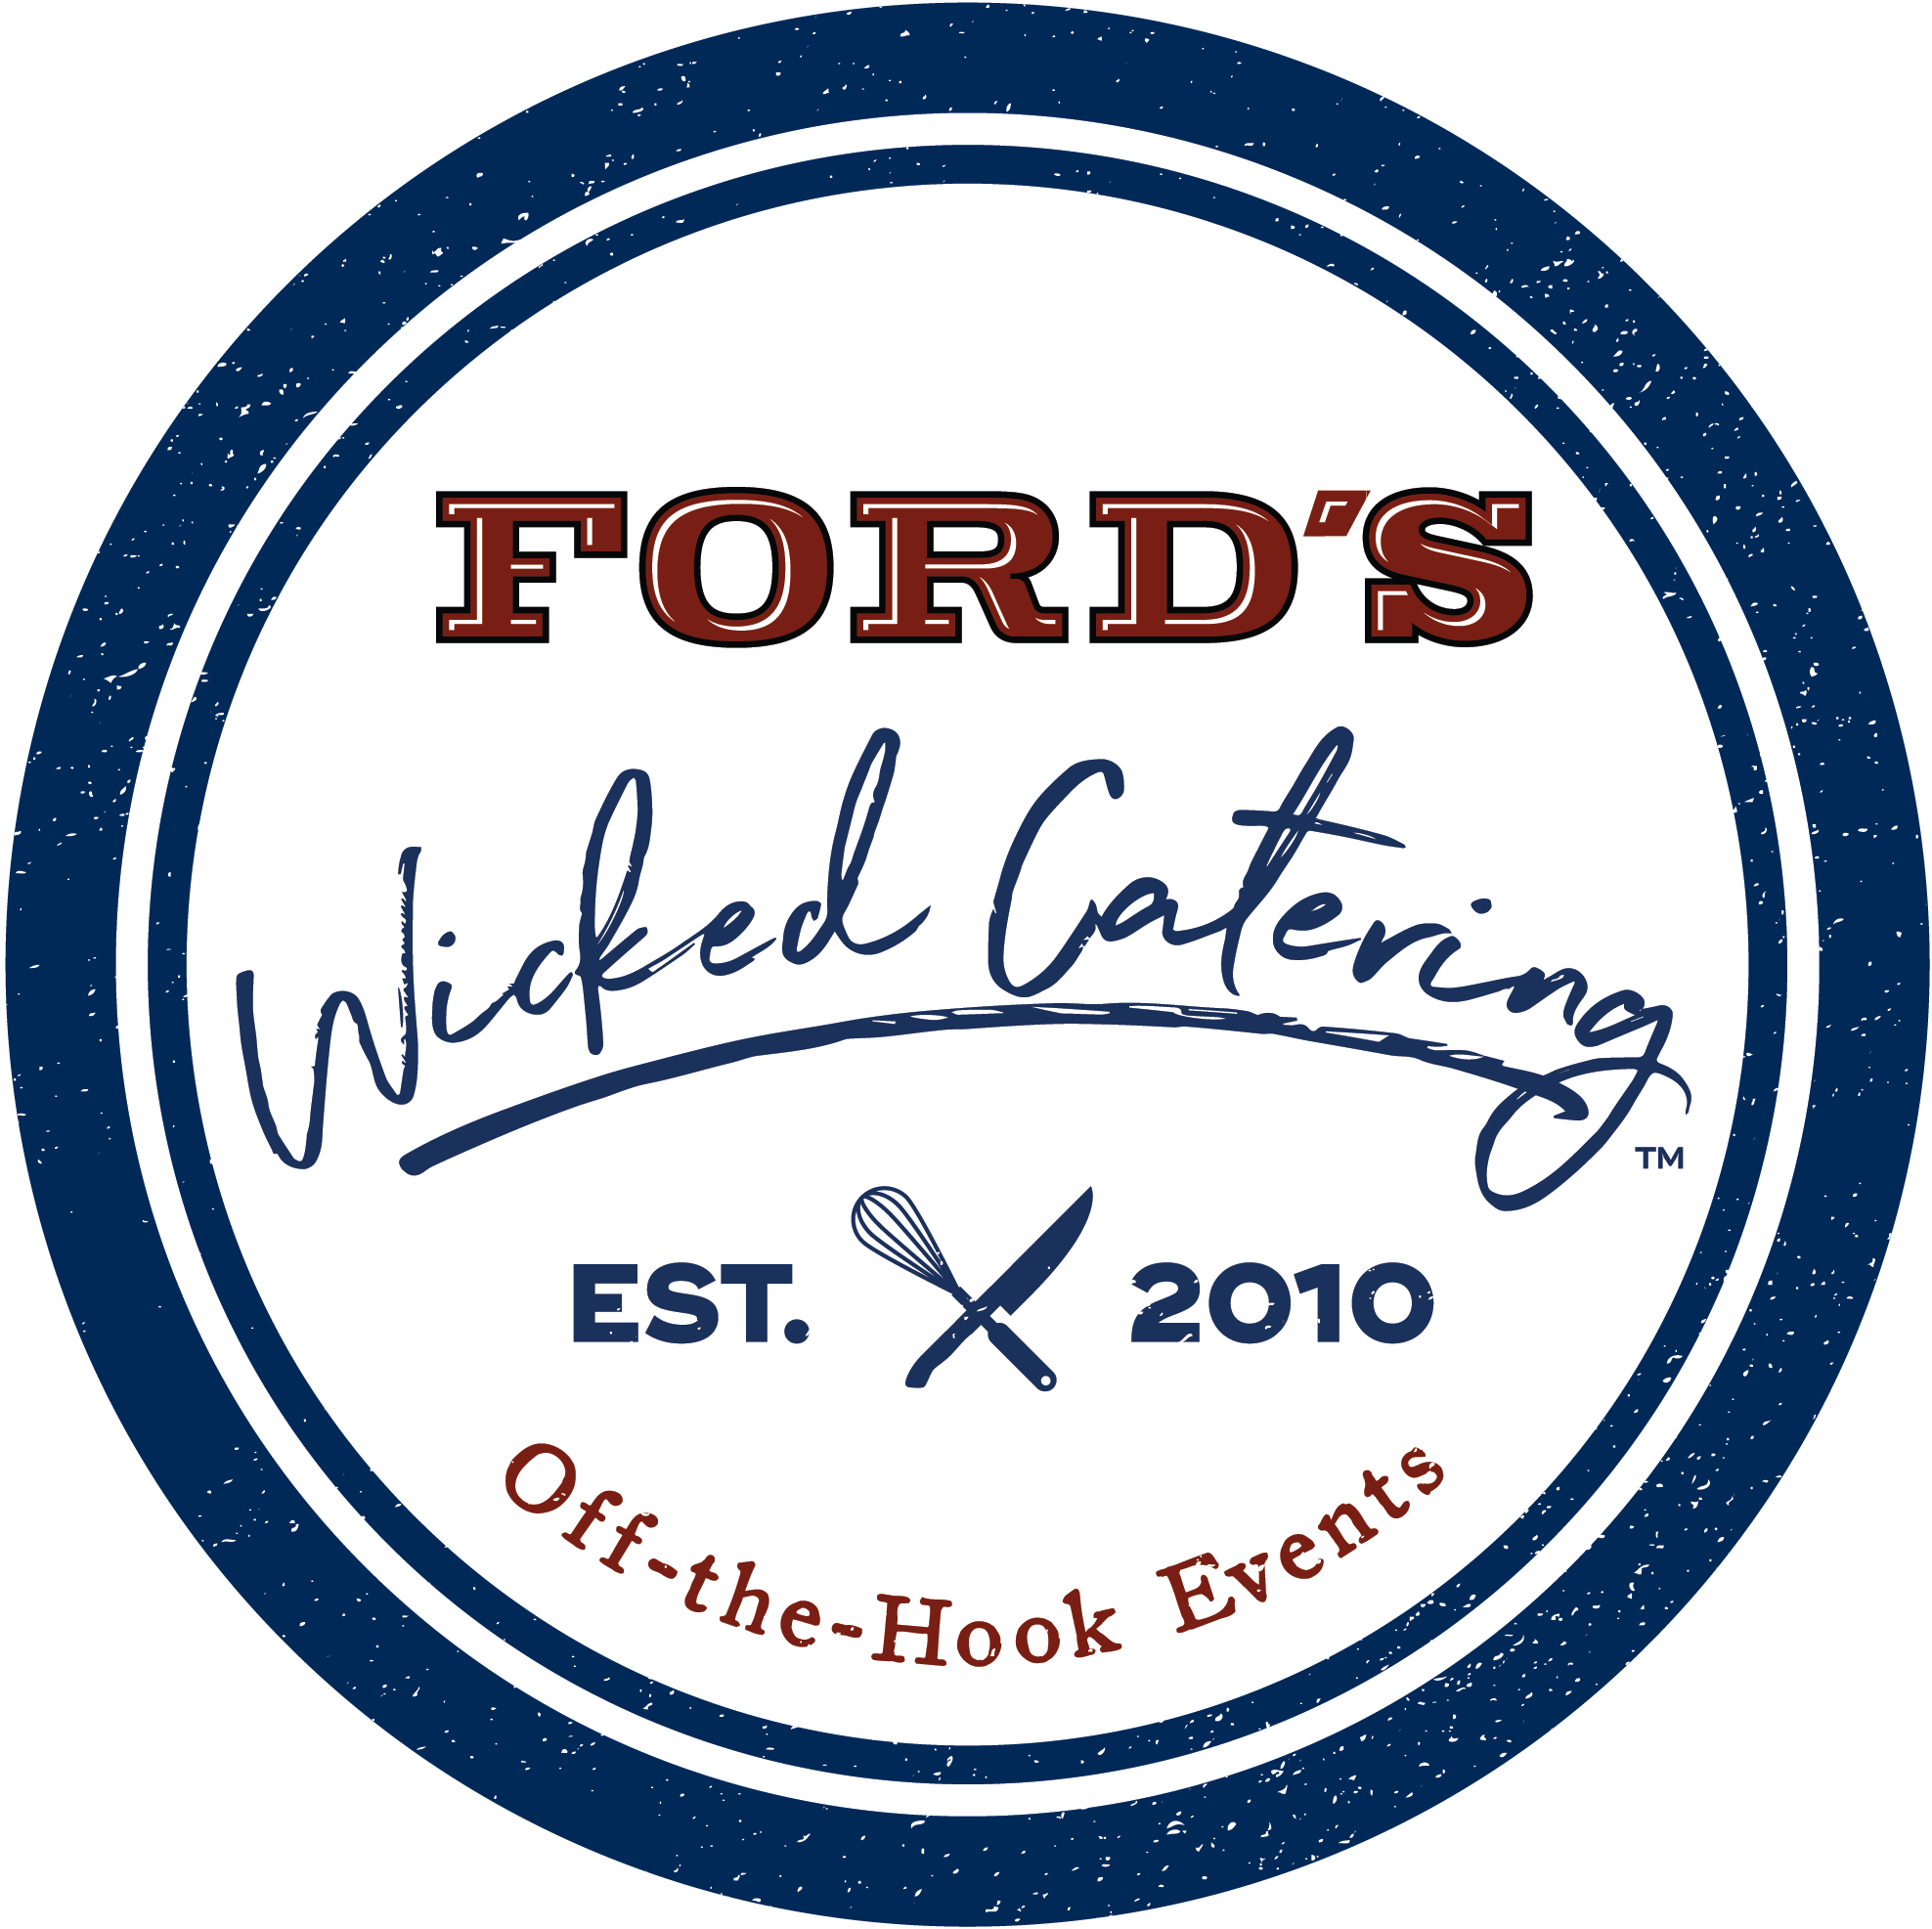 Ford's Wicked Catering